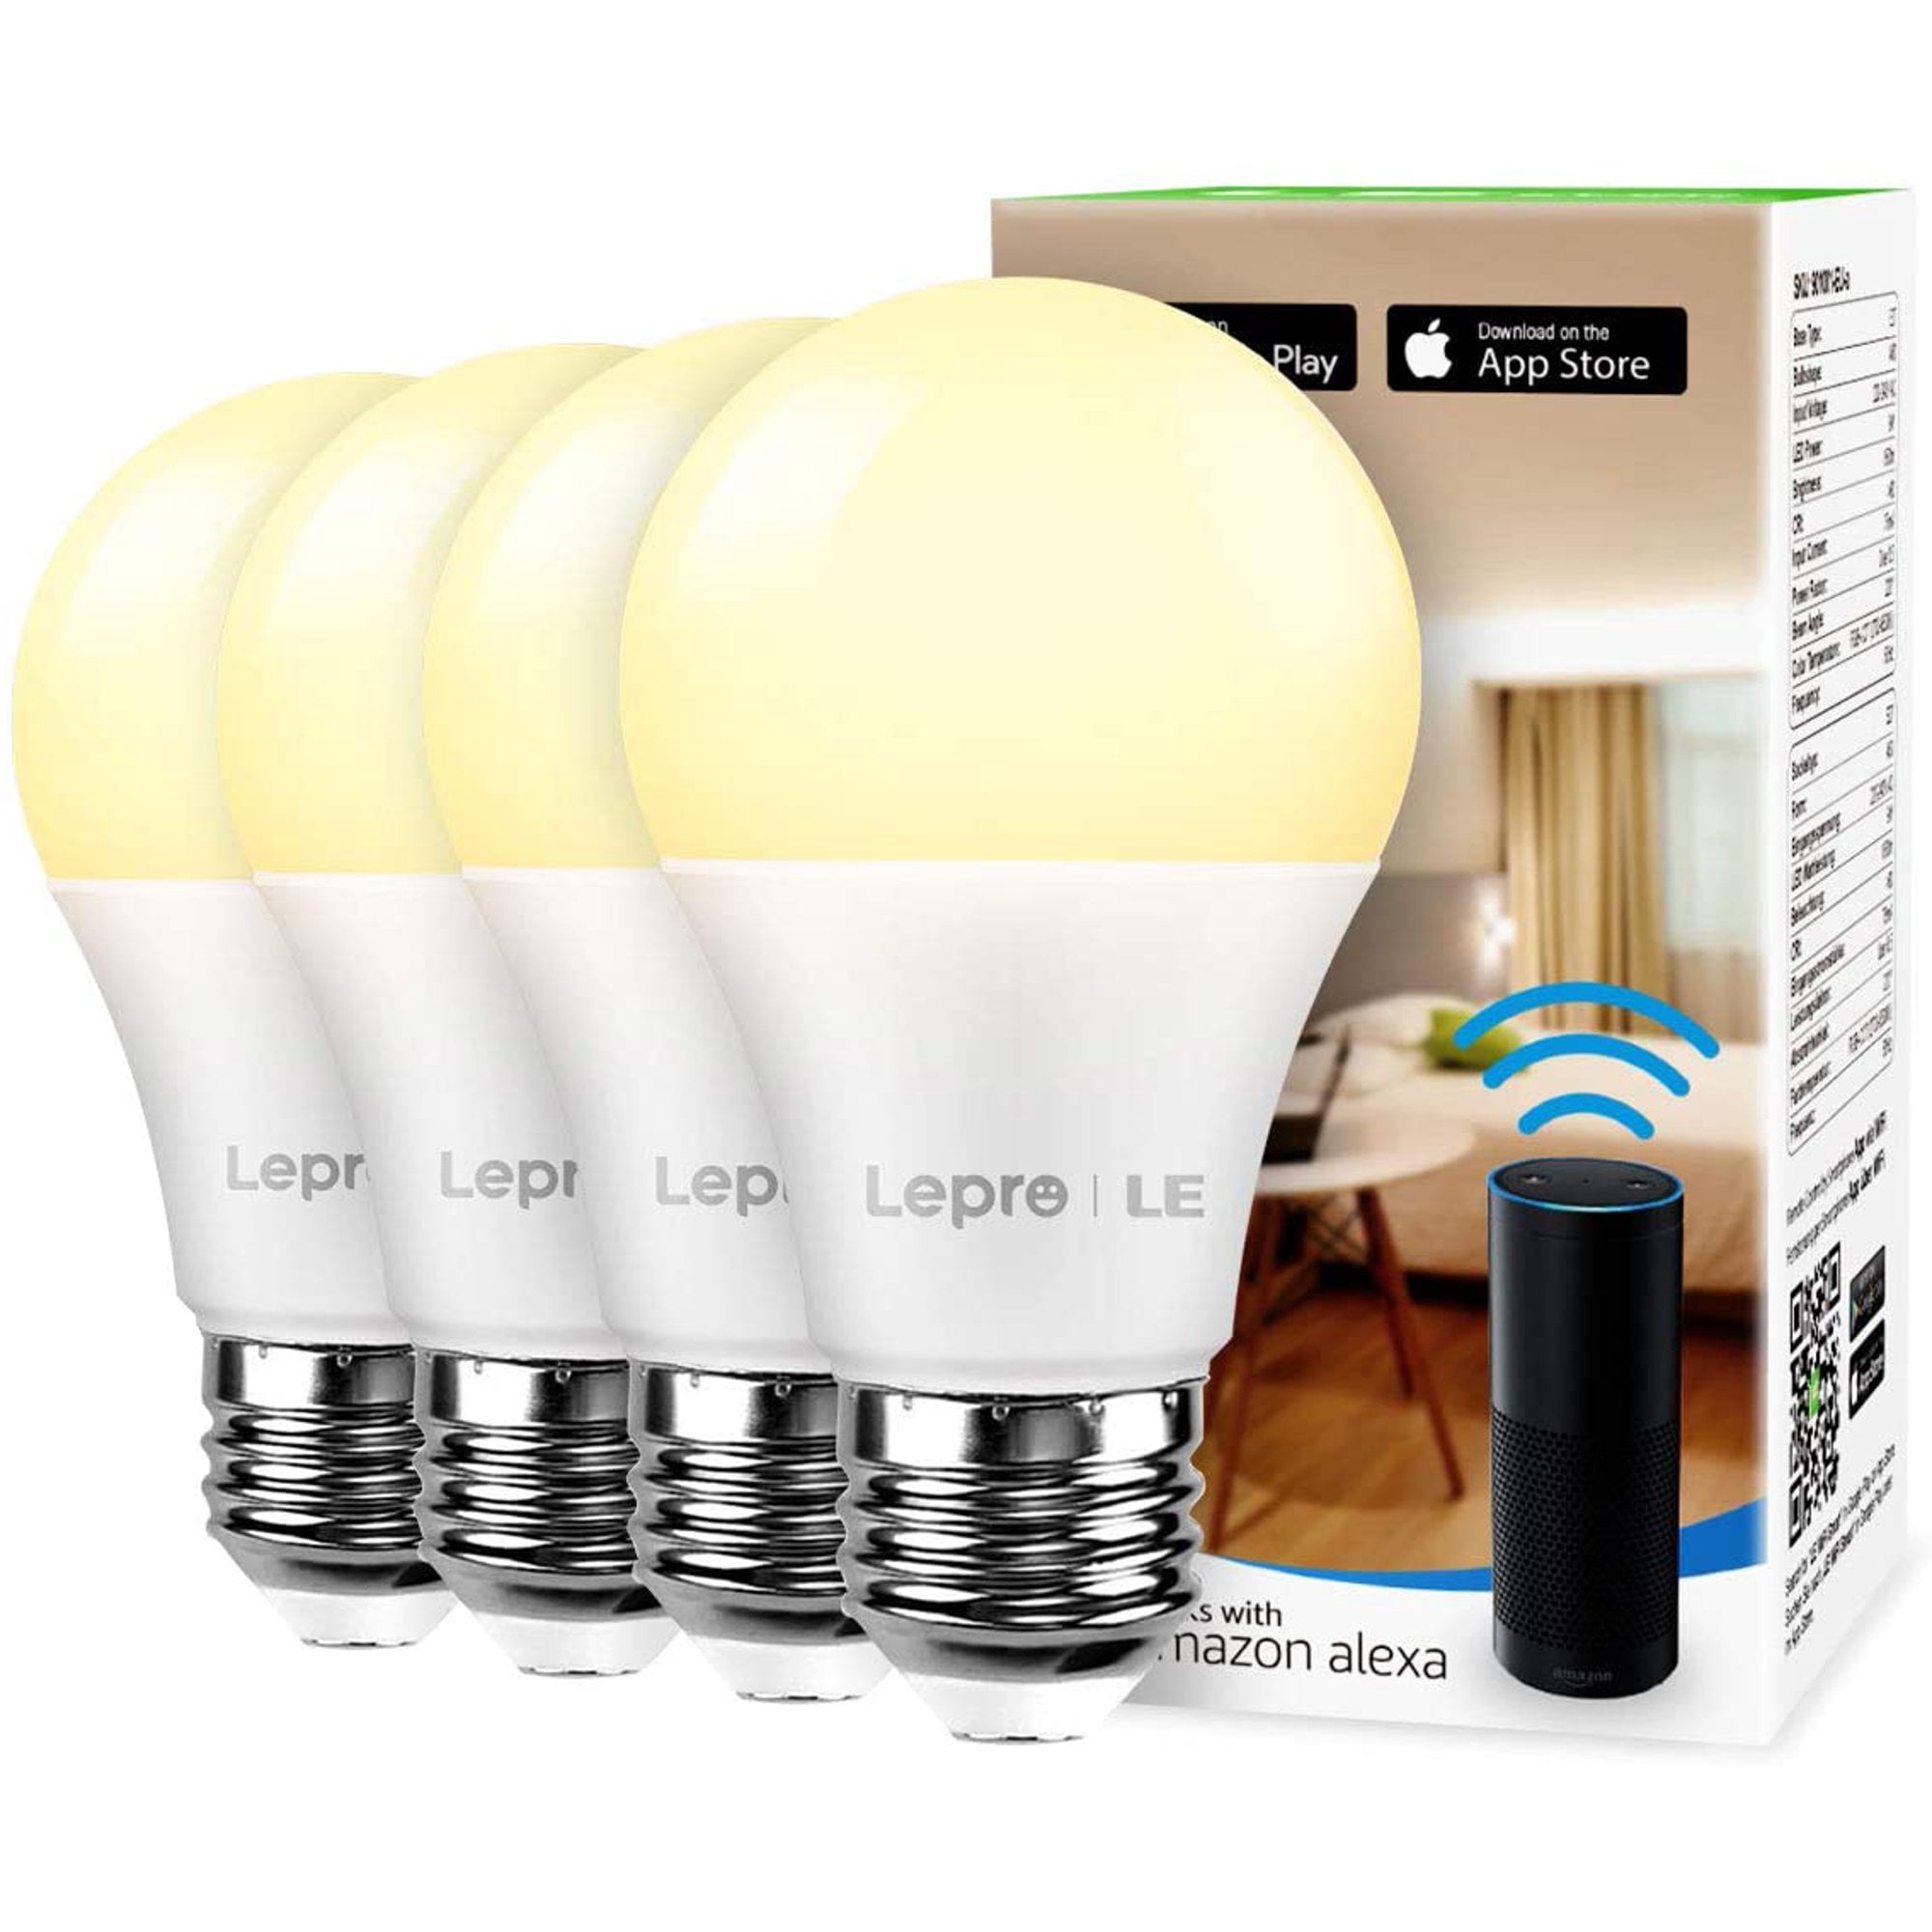 Lepro LED 60W Smart Light Bulbs Pack Value Set Dimmable LightBulbs RGB Color Changing Work with Google & Alexa A19 E26 Base , No Hub Required - Walmart.com